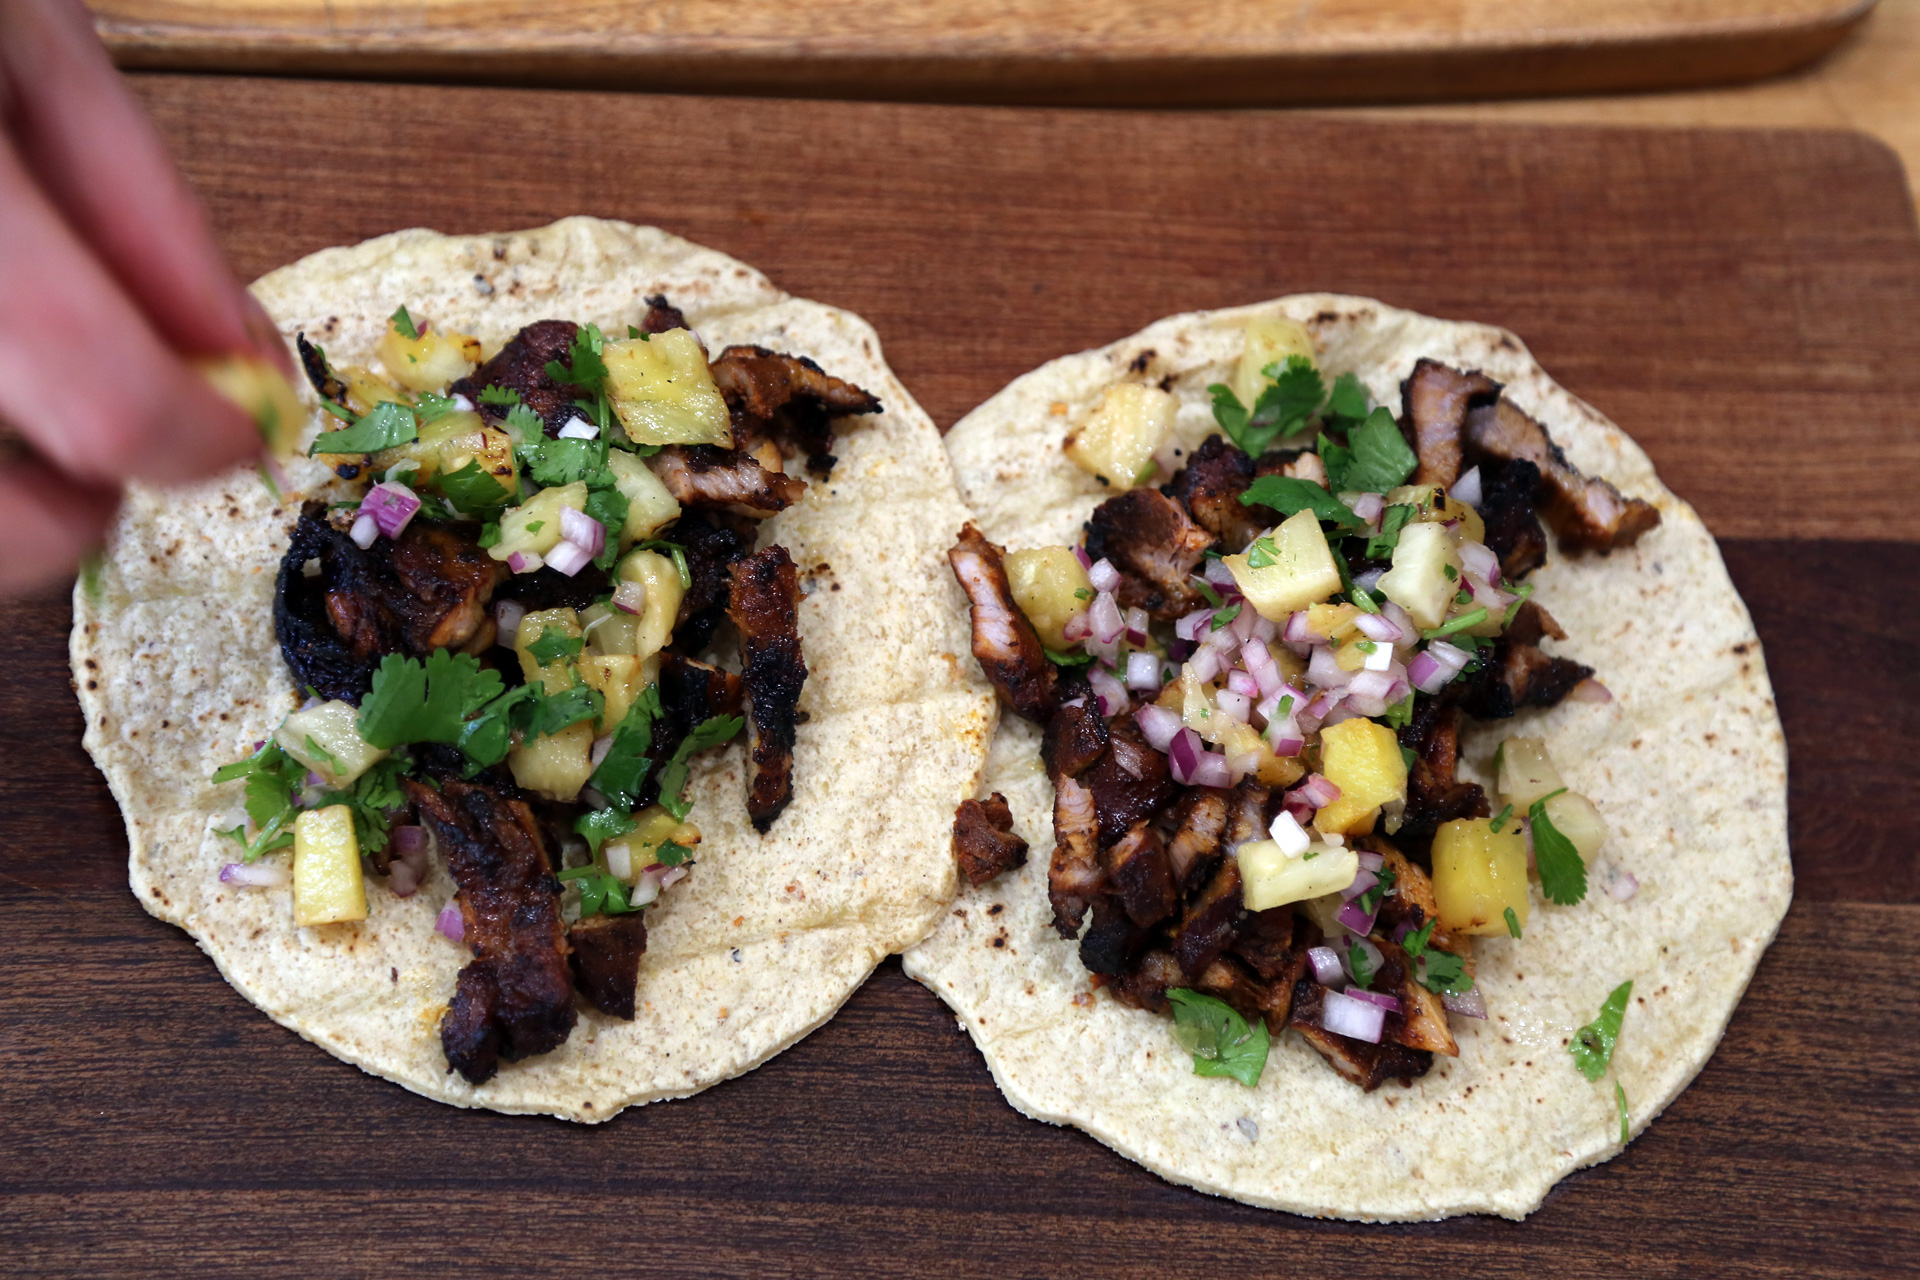 To assemble the tacos, heap some pork al pastor onto a tortilla, top with the pineapple mixture.